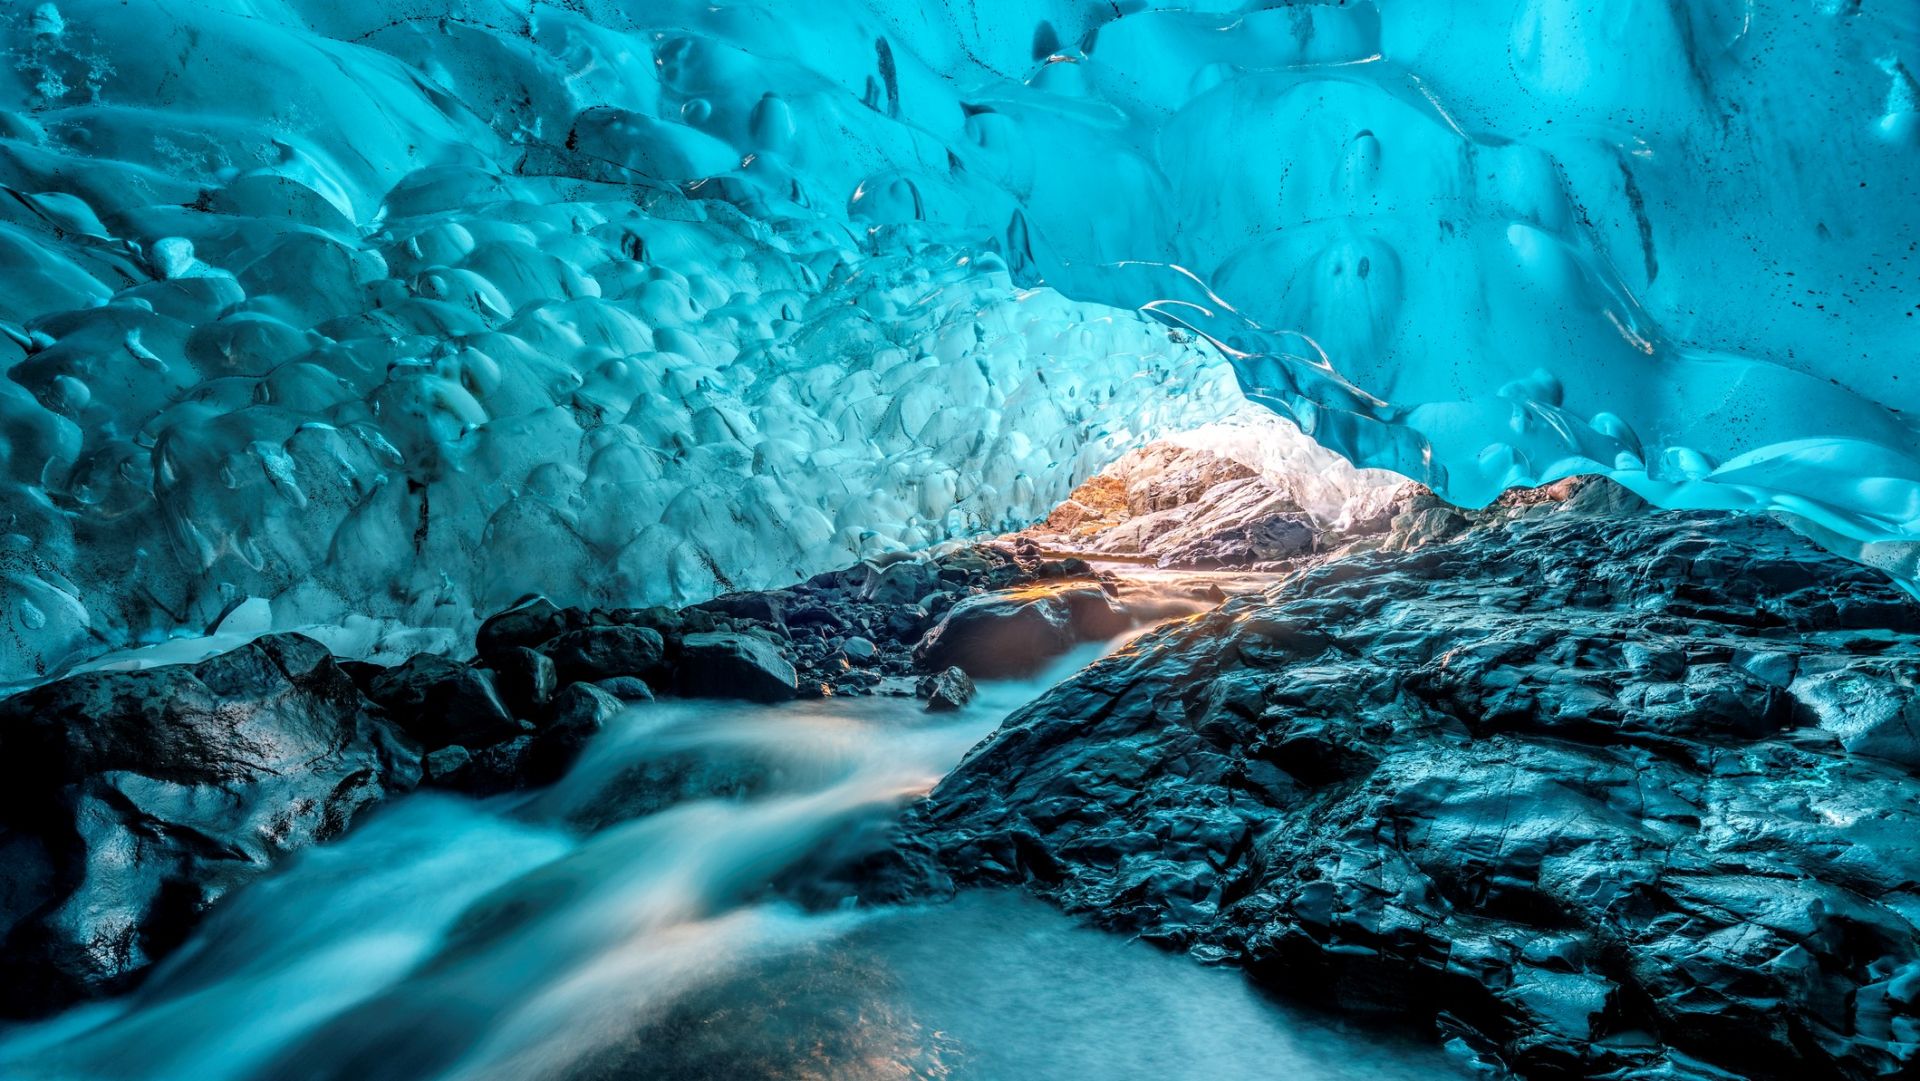 <p>                     Vatnajokull glacier is the second-largest glacier in Europe. It covers 3,130 square miles (8,100 square kilometers) — 8% of Iceland's landmass — according to the travel website Guide to Iceland.                    </p>                                      <p>                     The monumental glacier is over 3,000 feet (900 m) deep in some places and conceals several active volcanoes below its surface, the most famous being Grímsvötn, Öræfajökull and Bárðarbunga. Geologists believe volcanic eruptions from this region are overdue and that we could therefore see significant activity within the next 50 years.                    </p>                                      <p>                     Vatnajökull is also home to enchanting ice caves like the one pictured above, with glacier and ice cave tours available during the winter months.                    </p>                                      <p>                     The glacier is shrinking year by year due to warming global temperatures; its thickness has decreased on average by about 3 feet (0.9 m) per year for the past 15 years.                    </p>